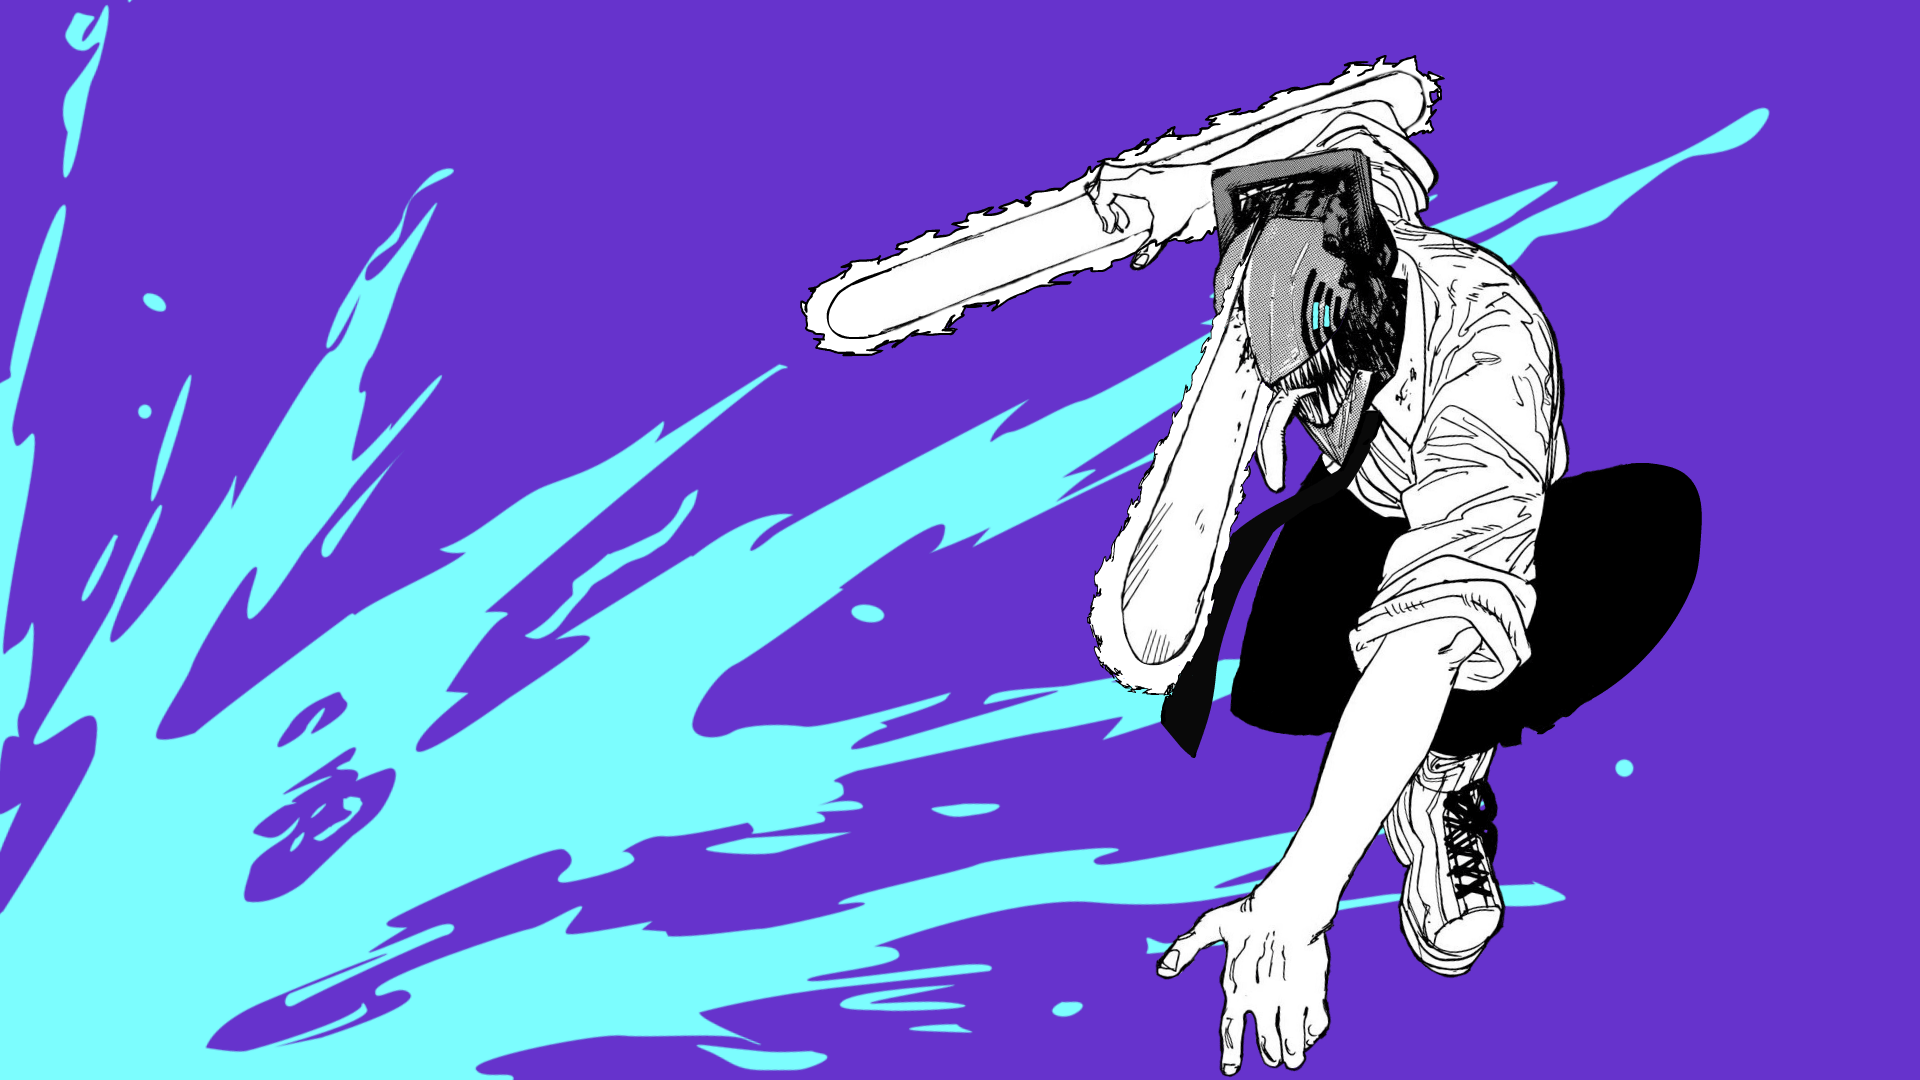 Made some animated desktop wallpapers because i cant wait for the anime rchainsawman